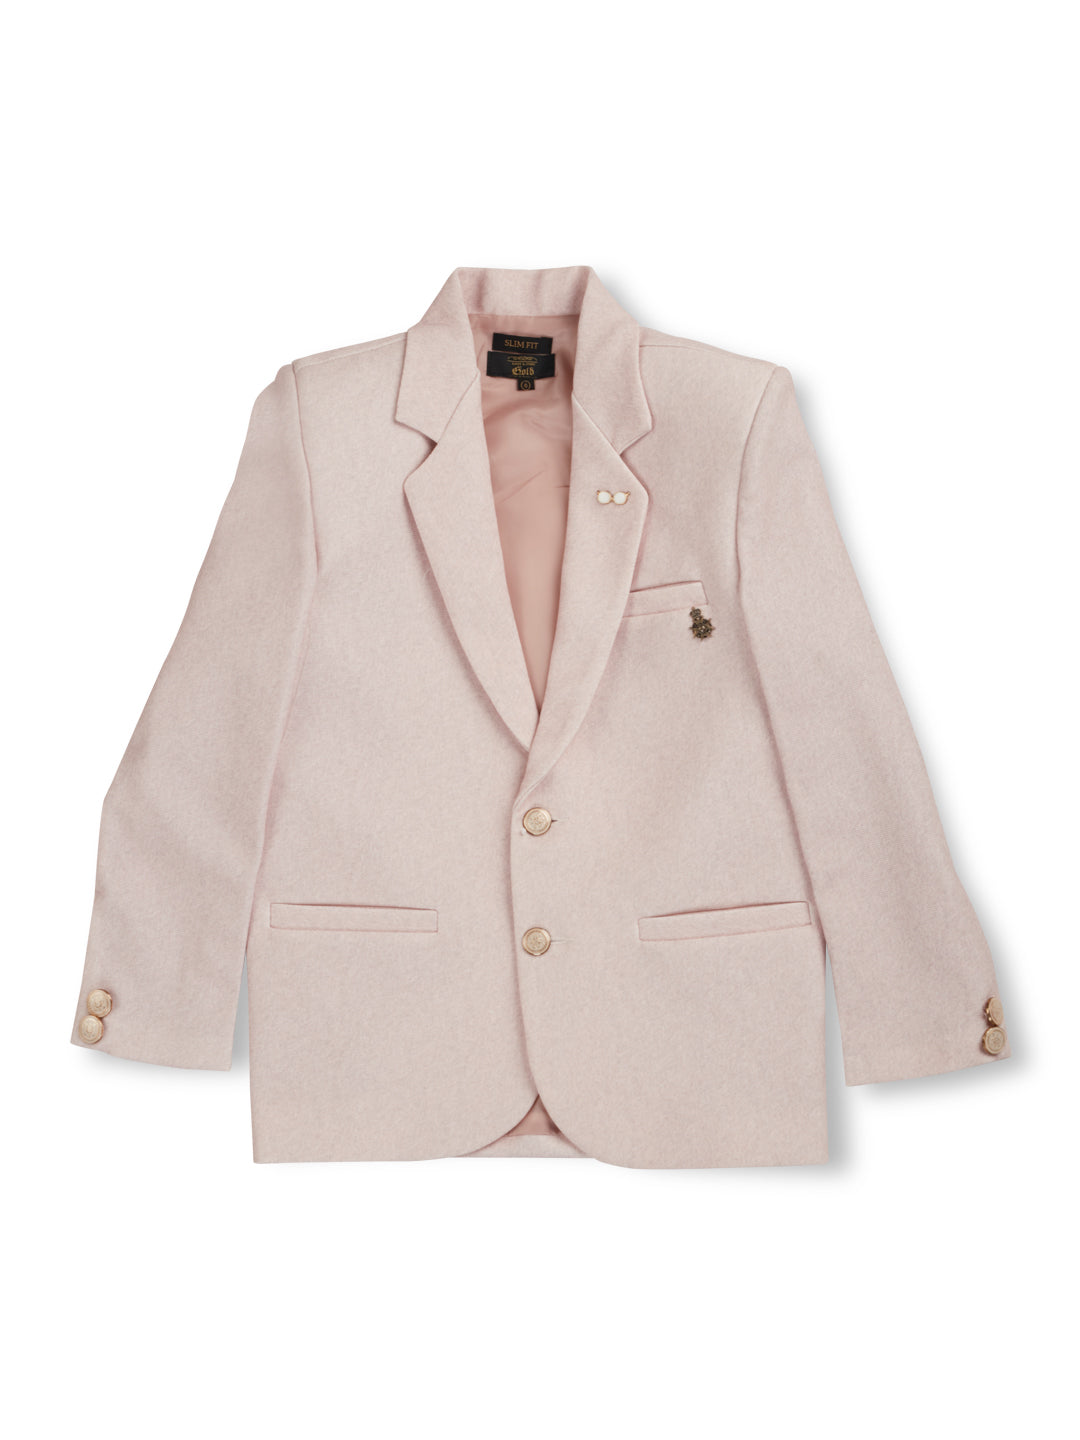 Boys Pink Solid Cotton Blazer Full Sleeves